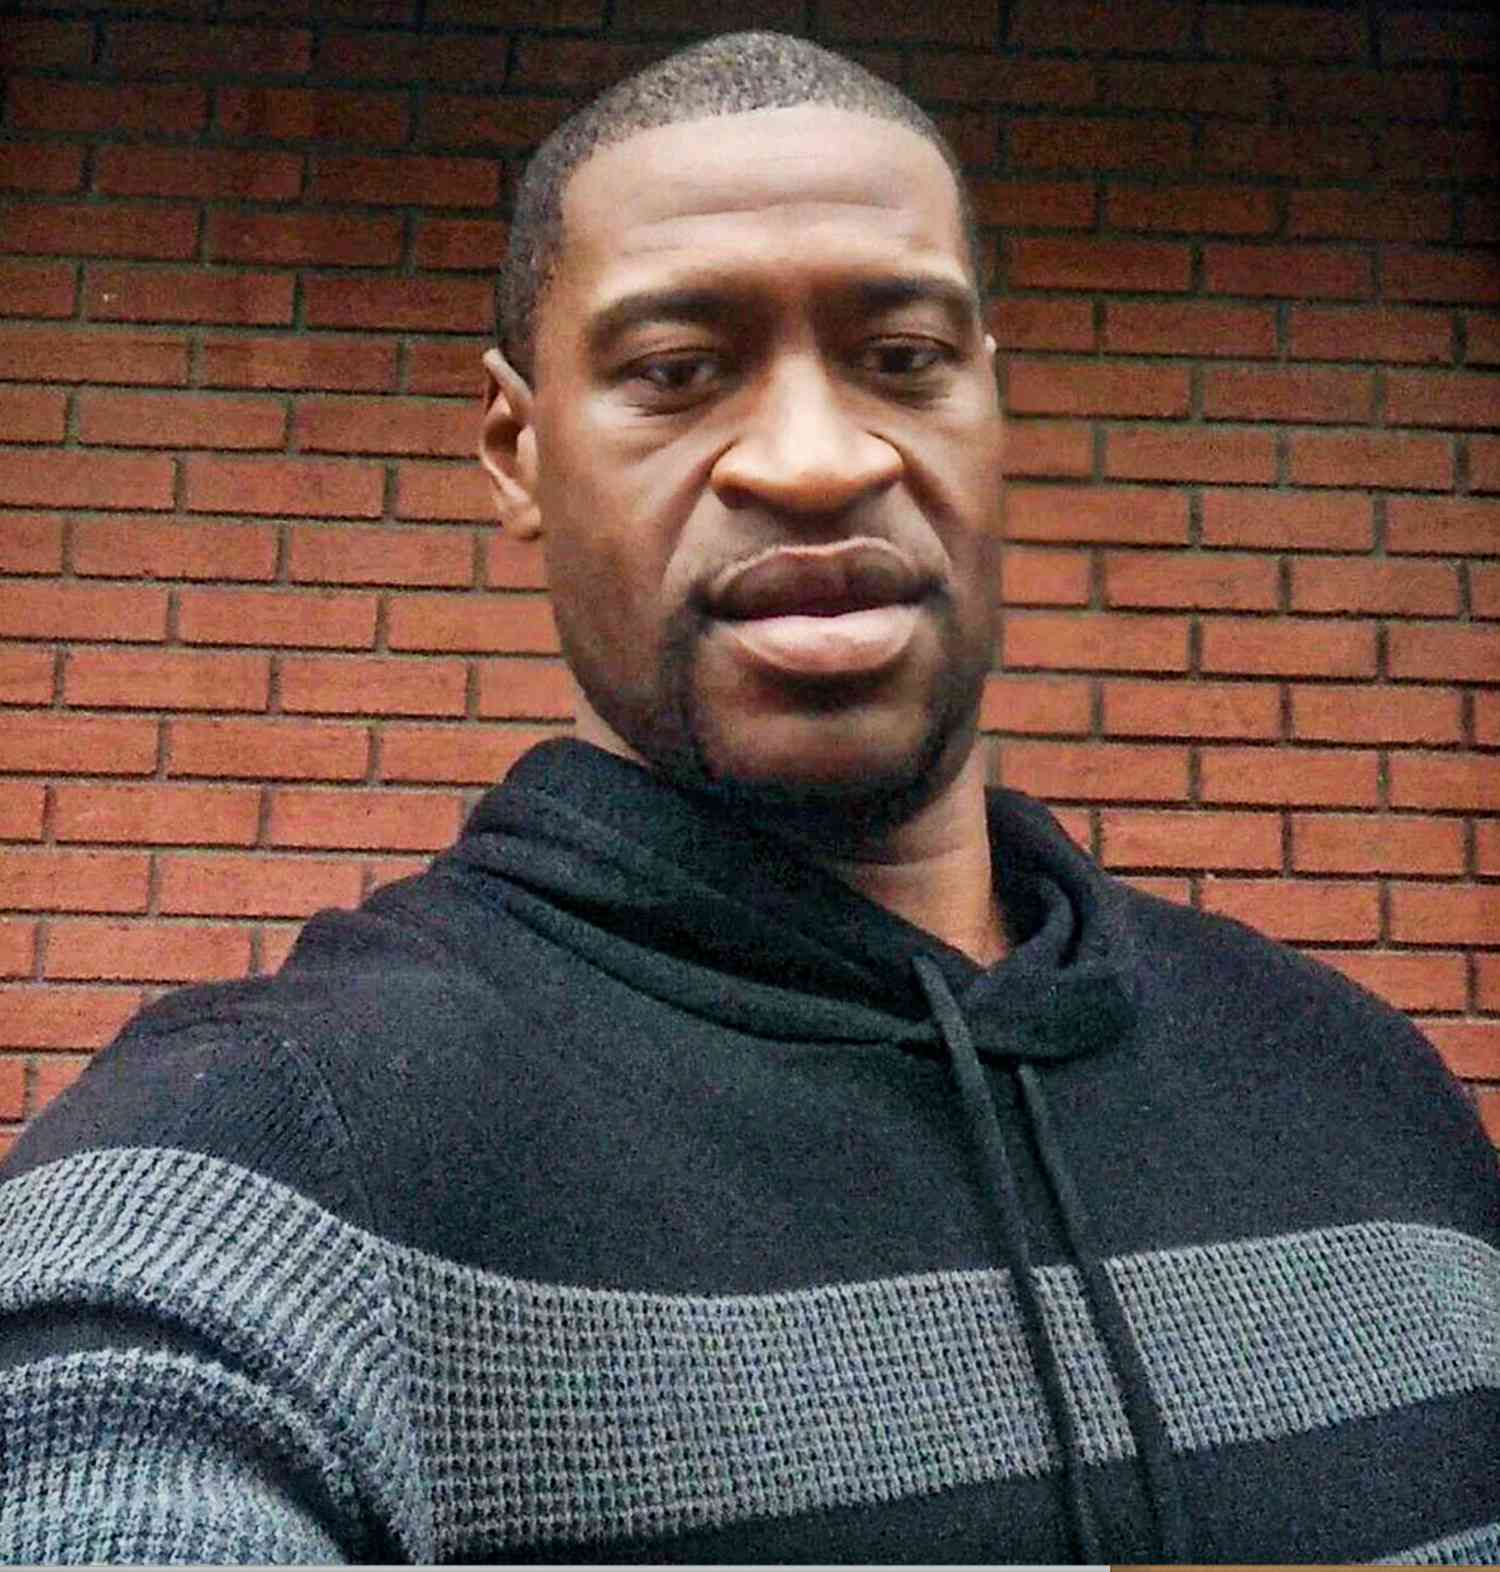 George Floyd, the man who was killed by police officers in Minneapolis on May 25, 2020.